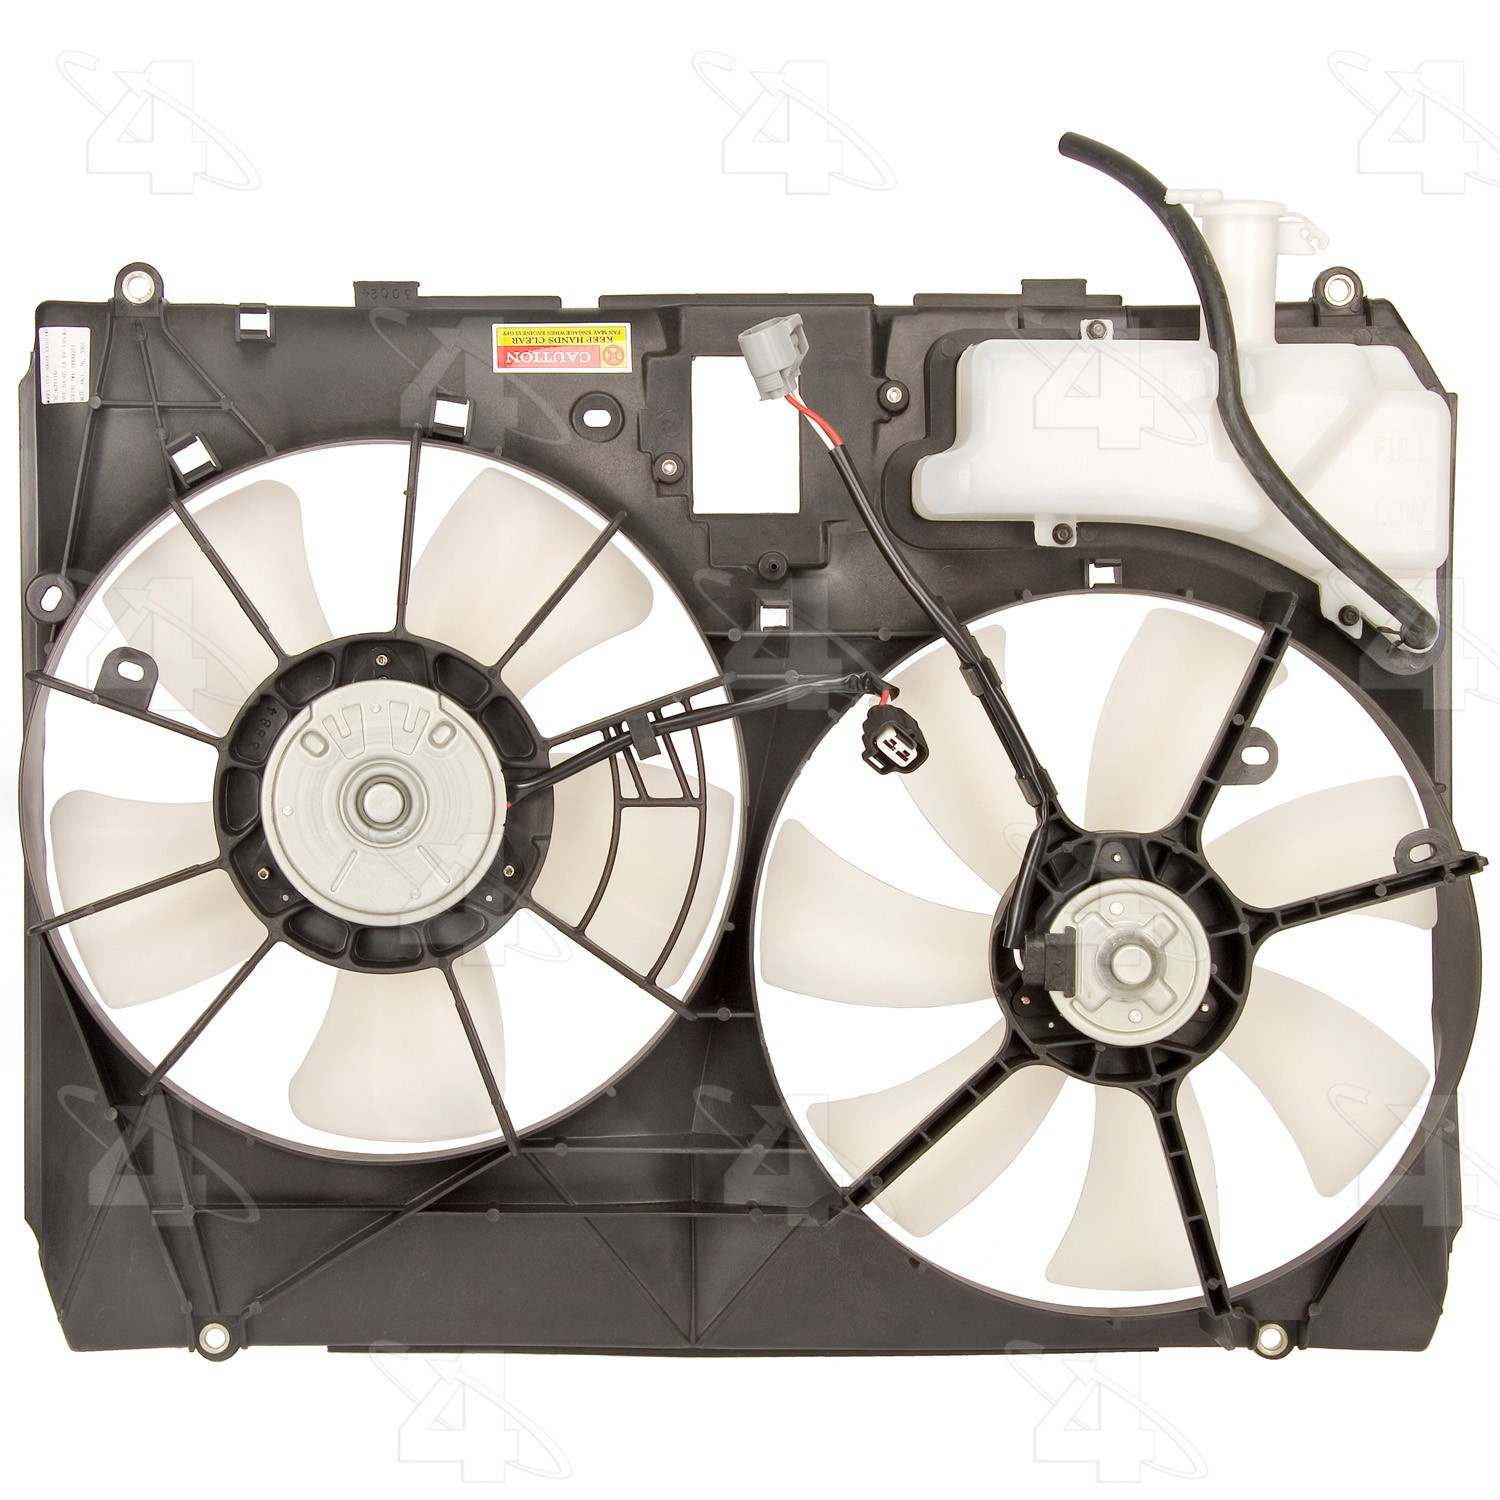 Details about  / For 2001-2003 Lexus RX300 Radiator Fan Assembly TYC 61582BQ 2002